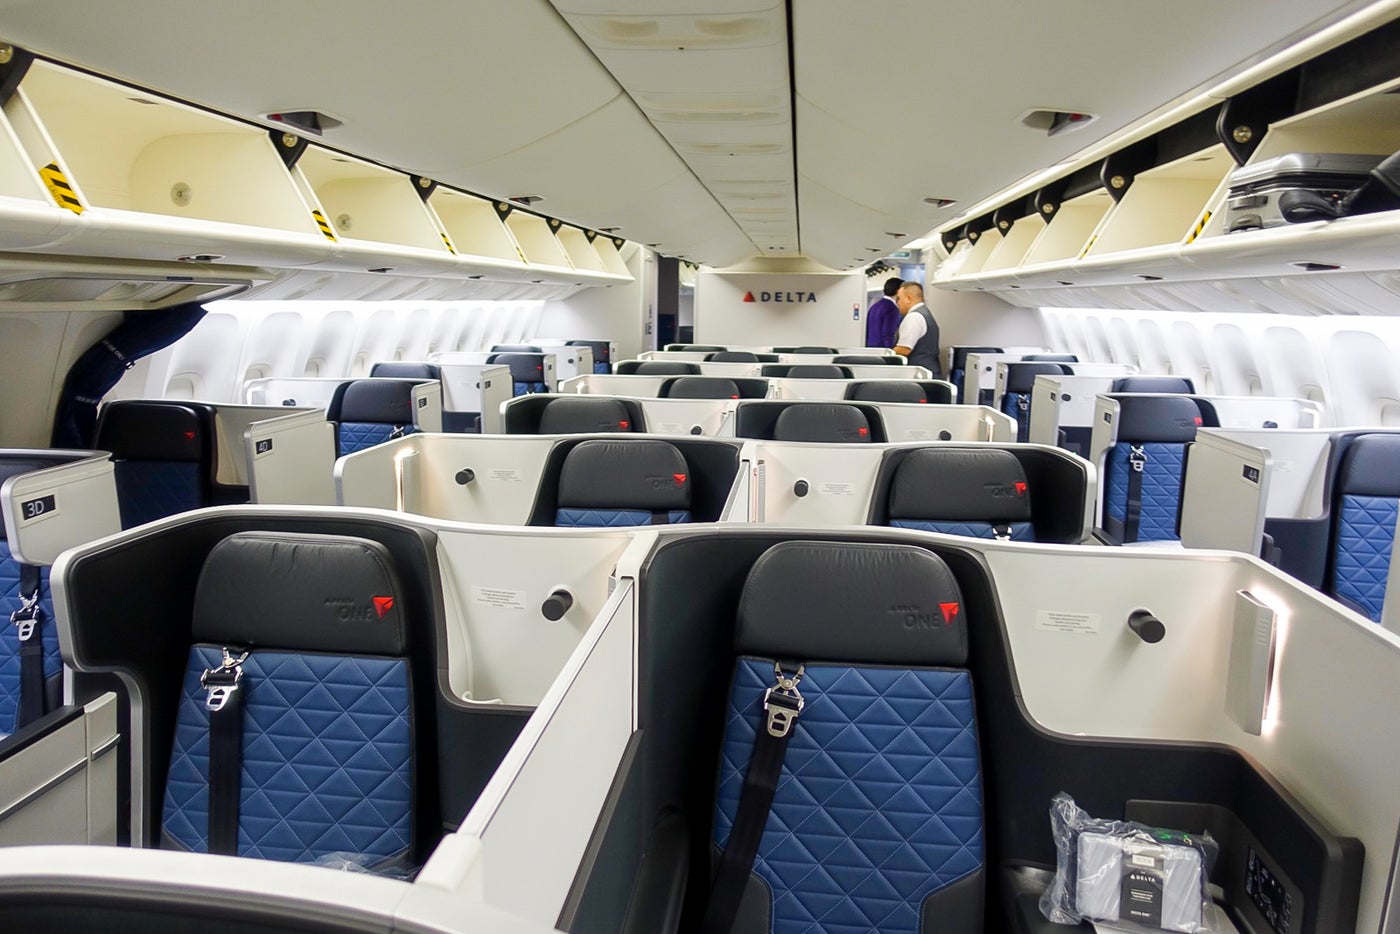 Aboard Delta's First Retrofitted 767-400ER With Brand-New Delta One Seats